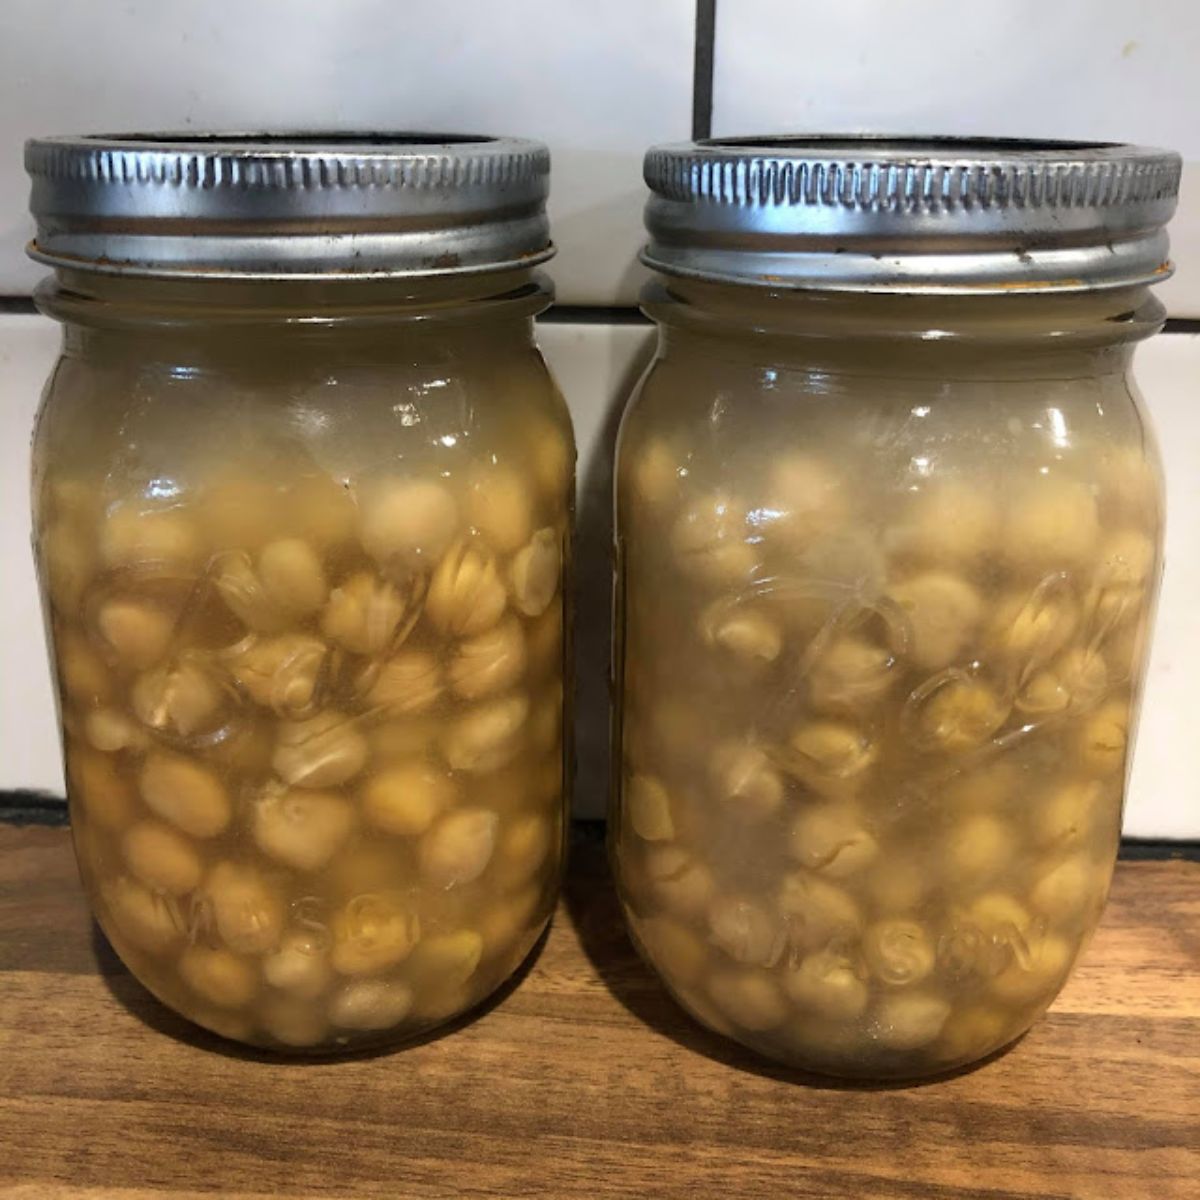 Canned chickpeas in two glass jars.